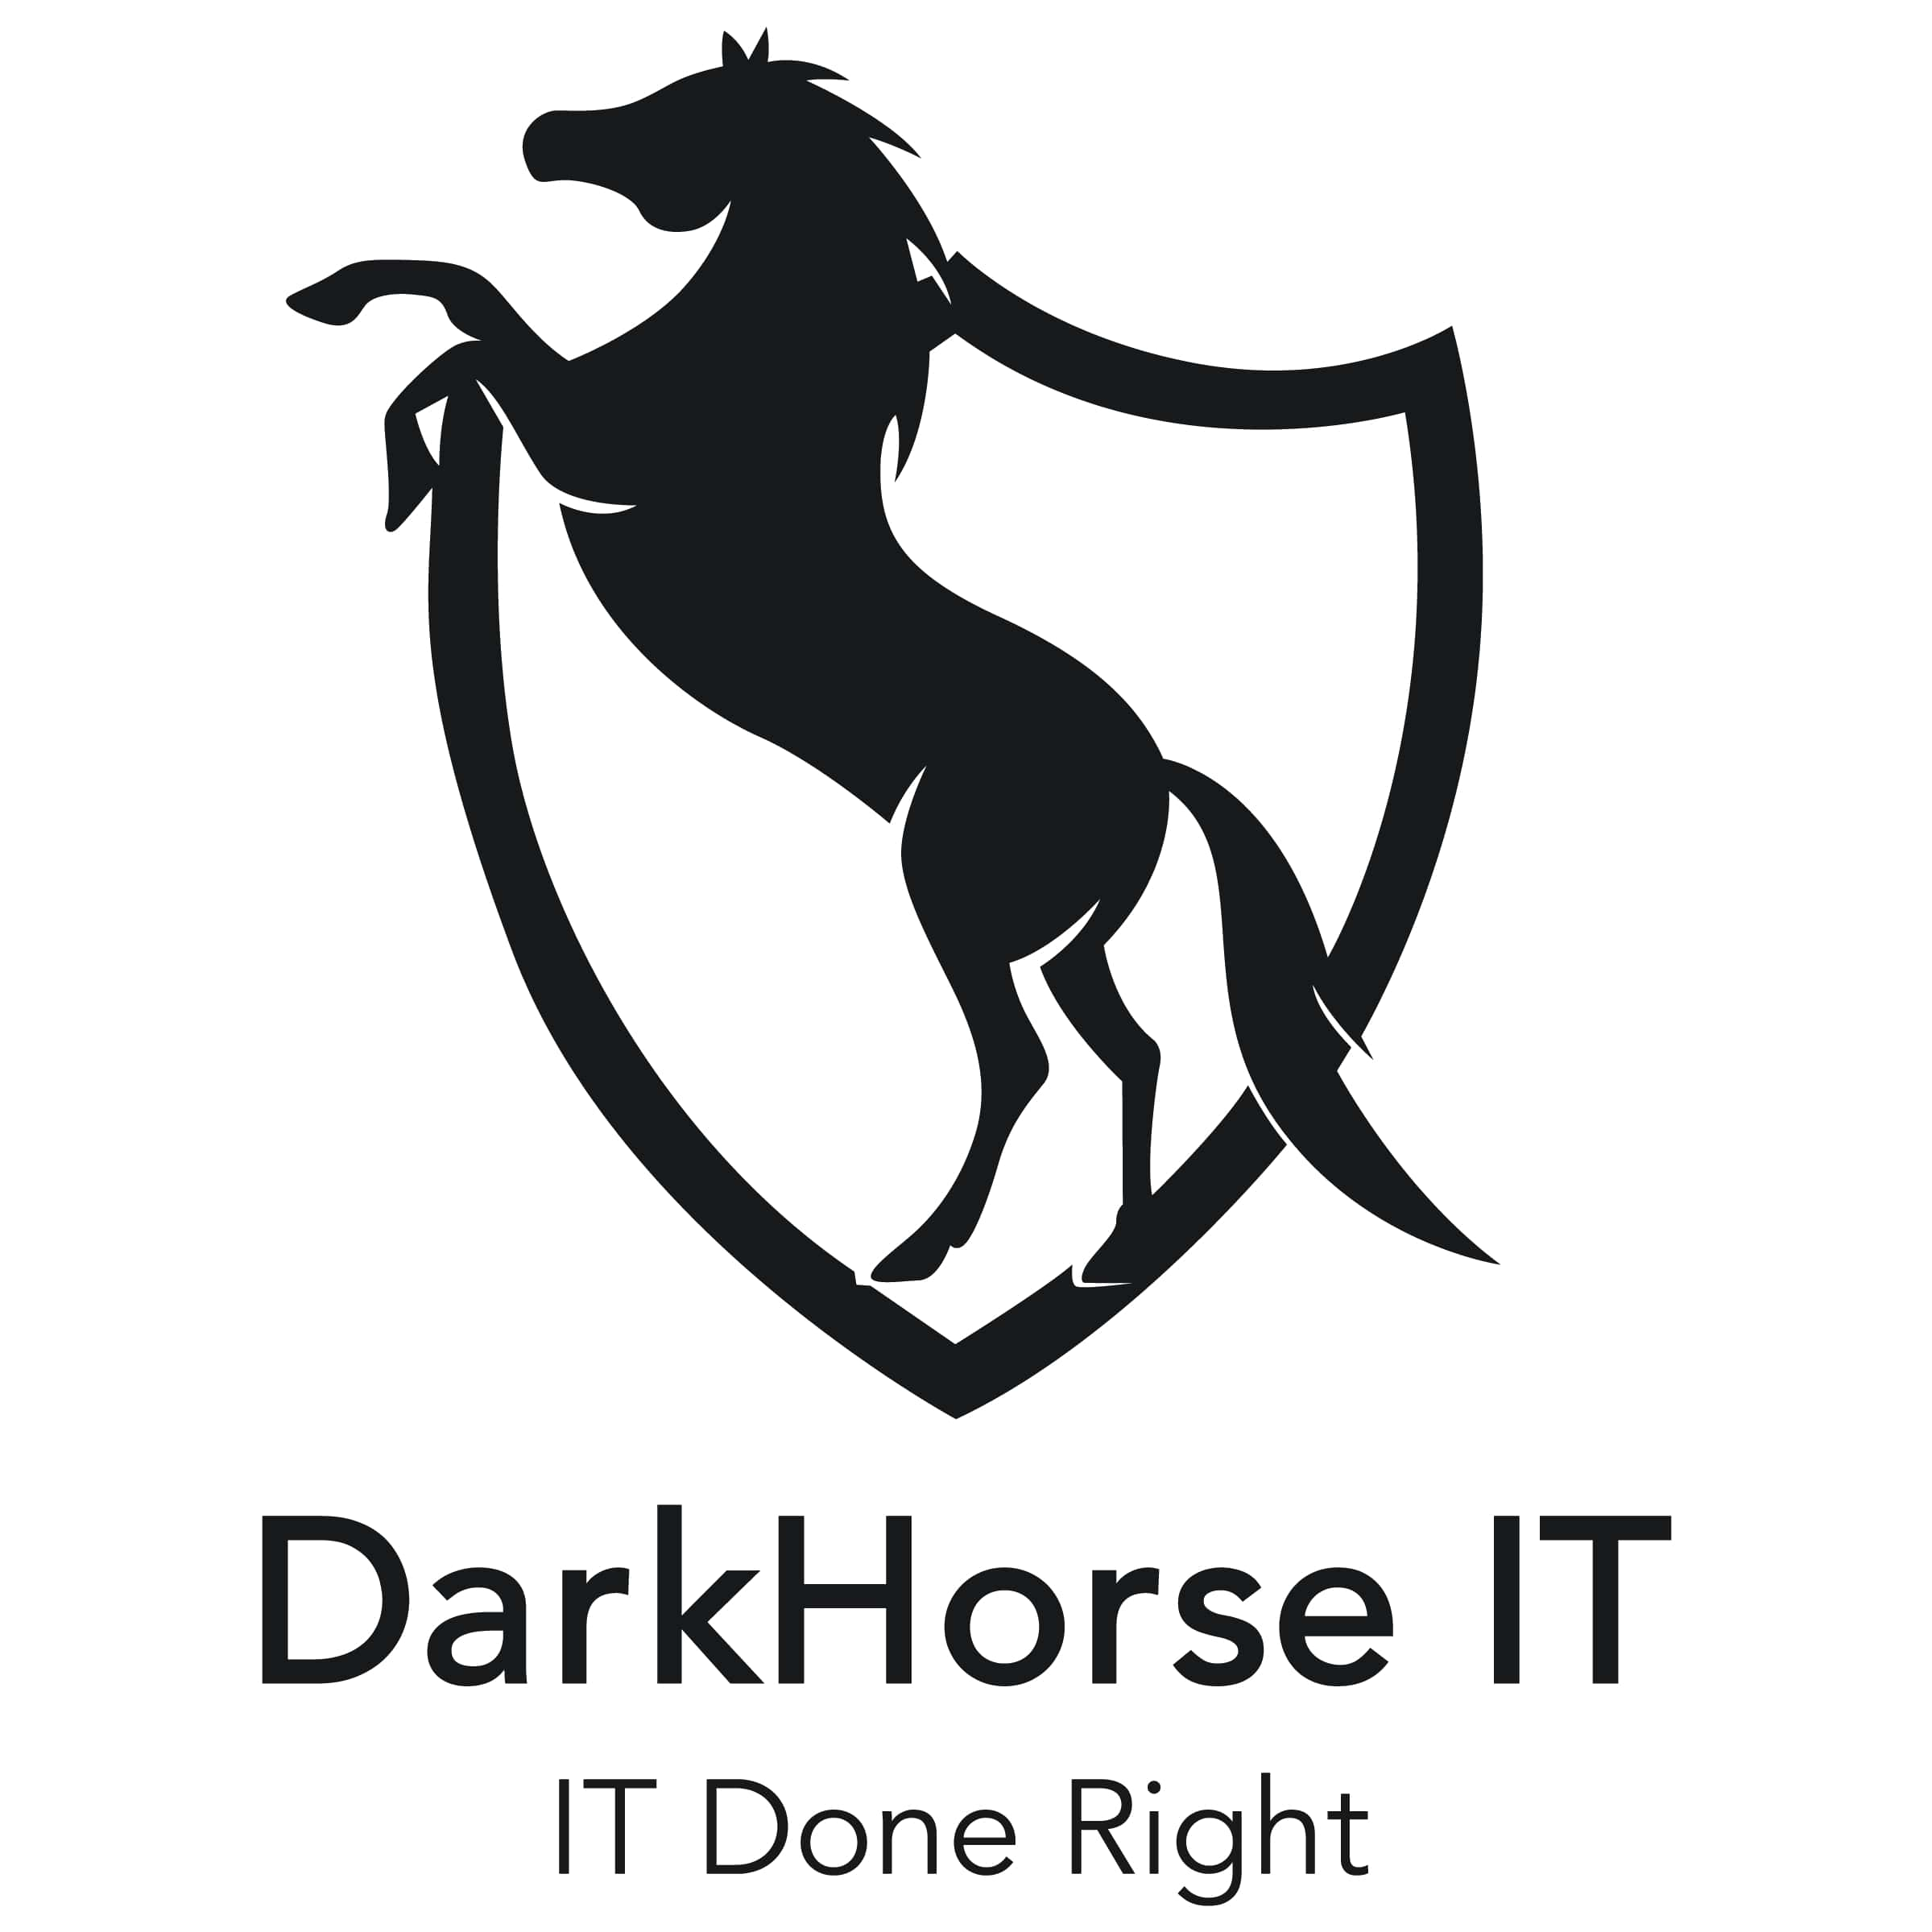 How To Protect Your Email Domain With Jeff Carney, Darkhorse IT.